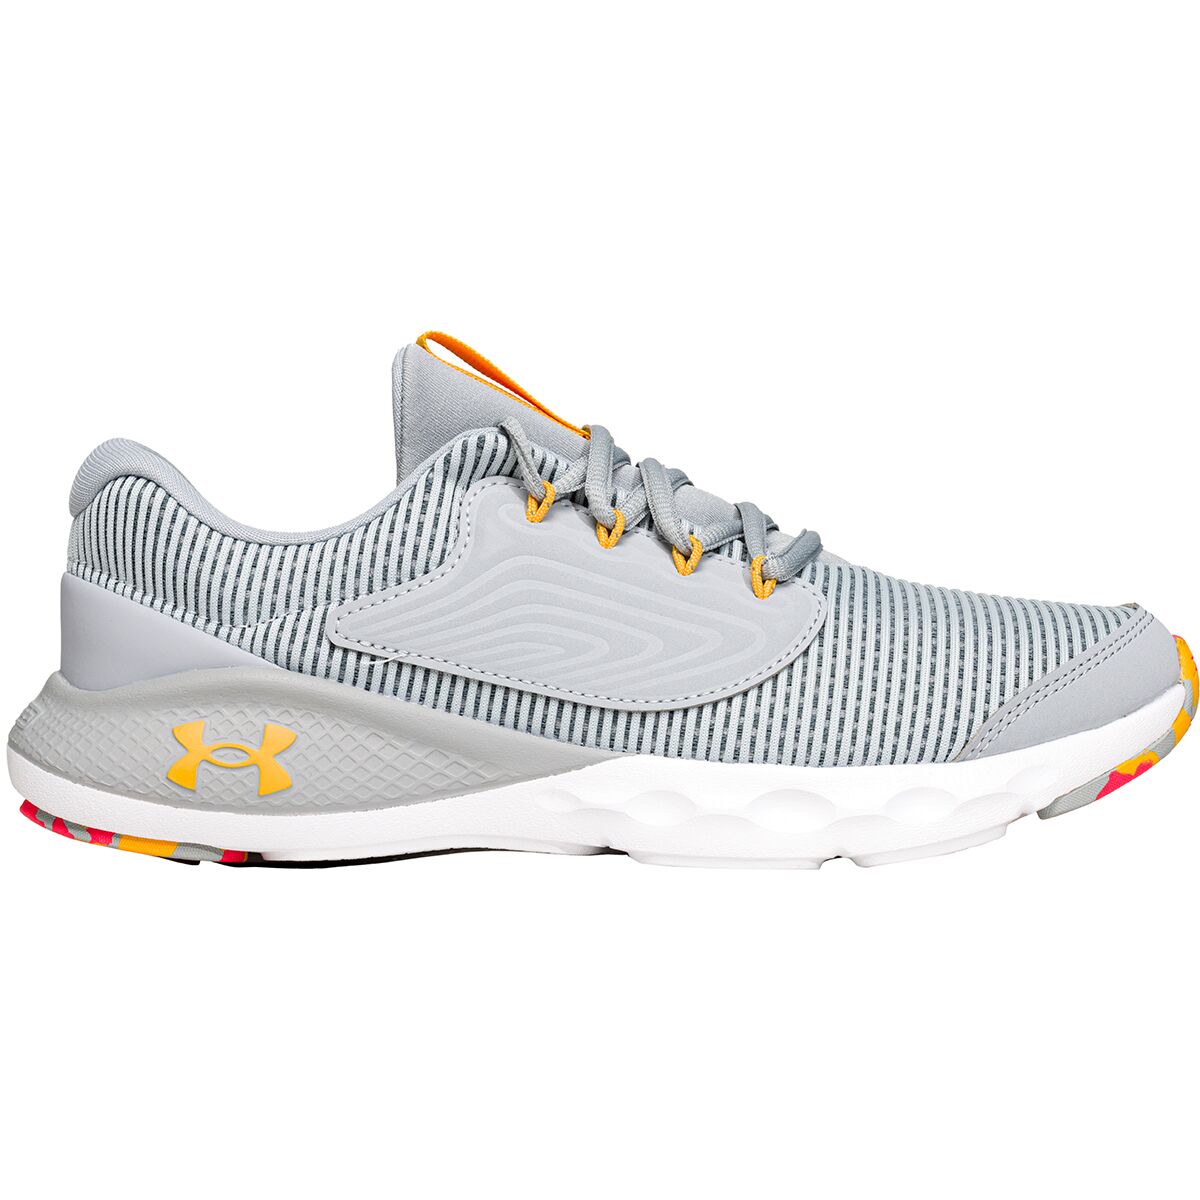 Under Armour BGS Charged Vantage 2 Shoe - Boys'